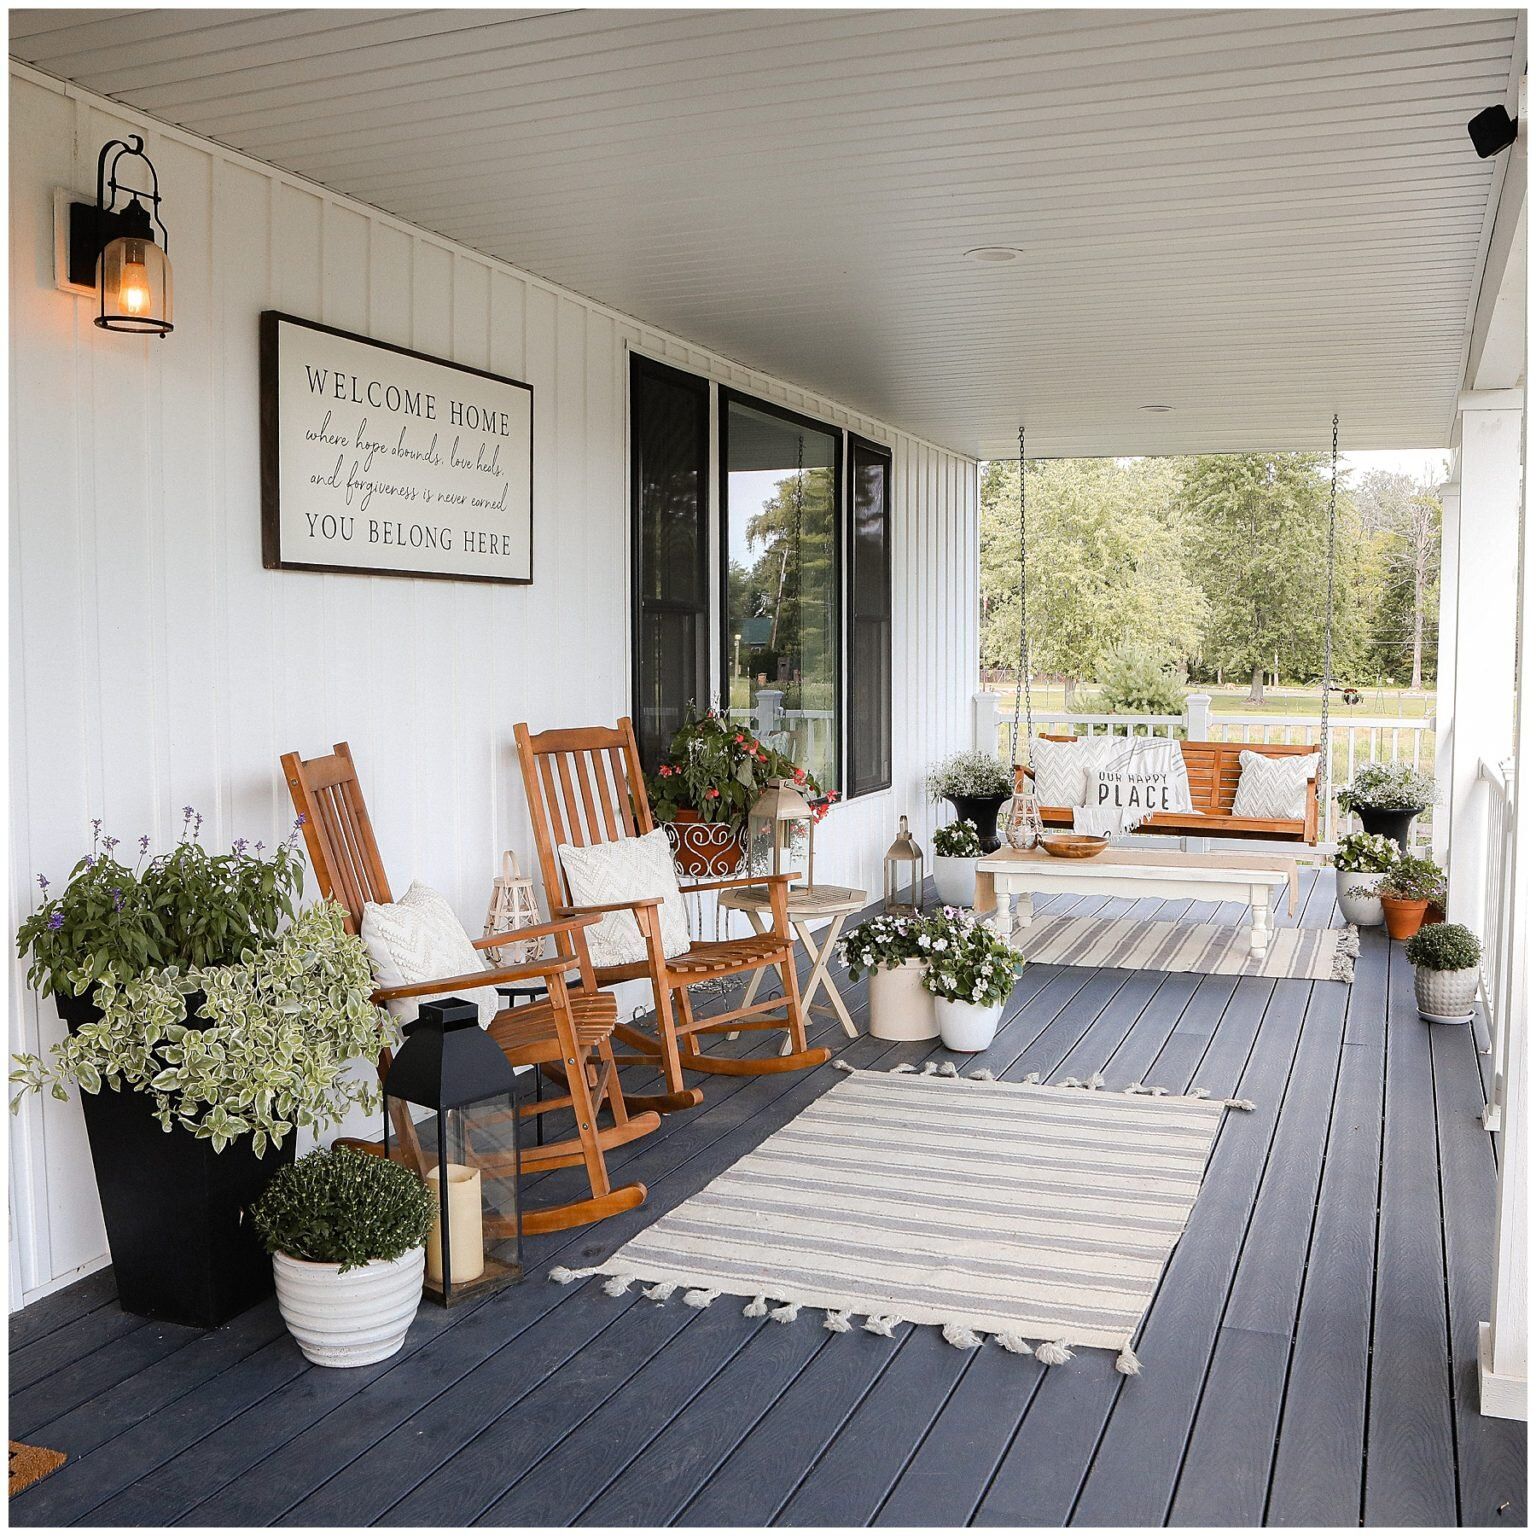 Charming Front Porch Decor Ideas to Make Your Home Stand Out